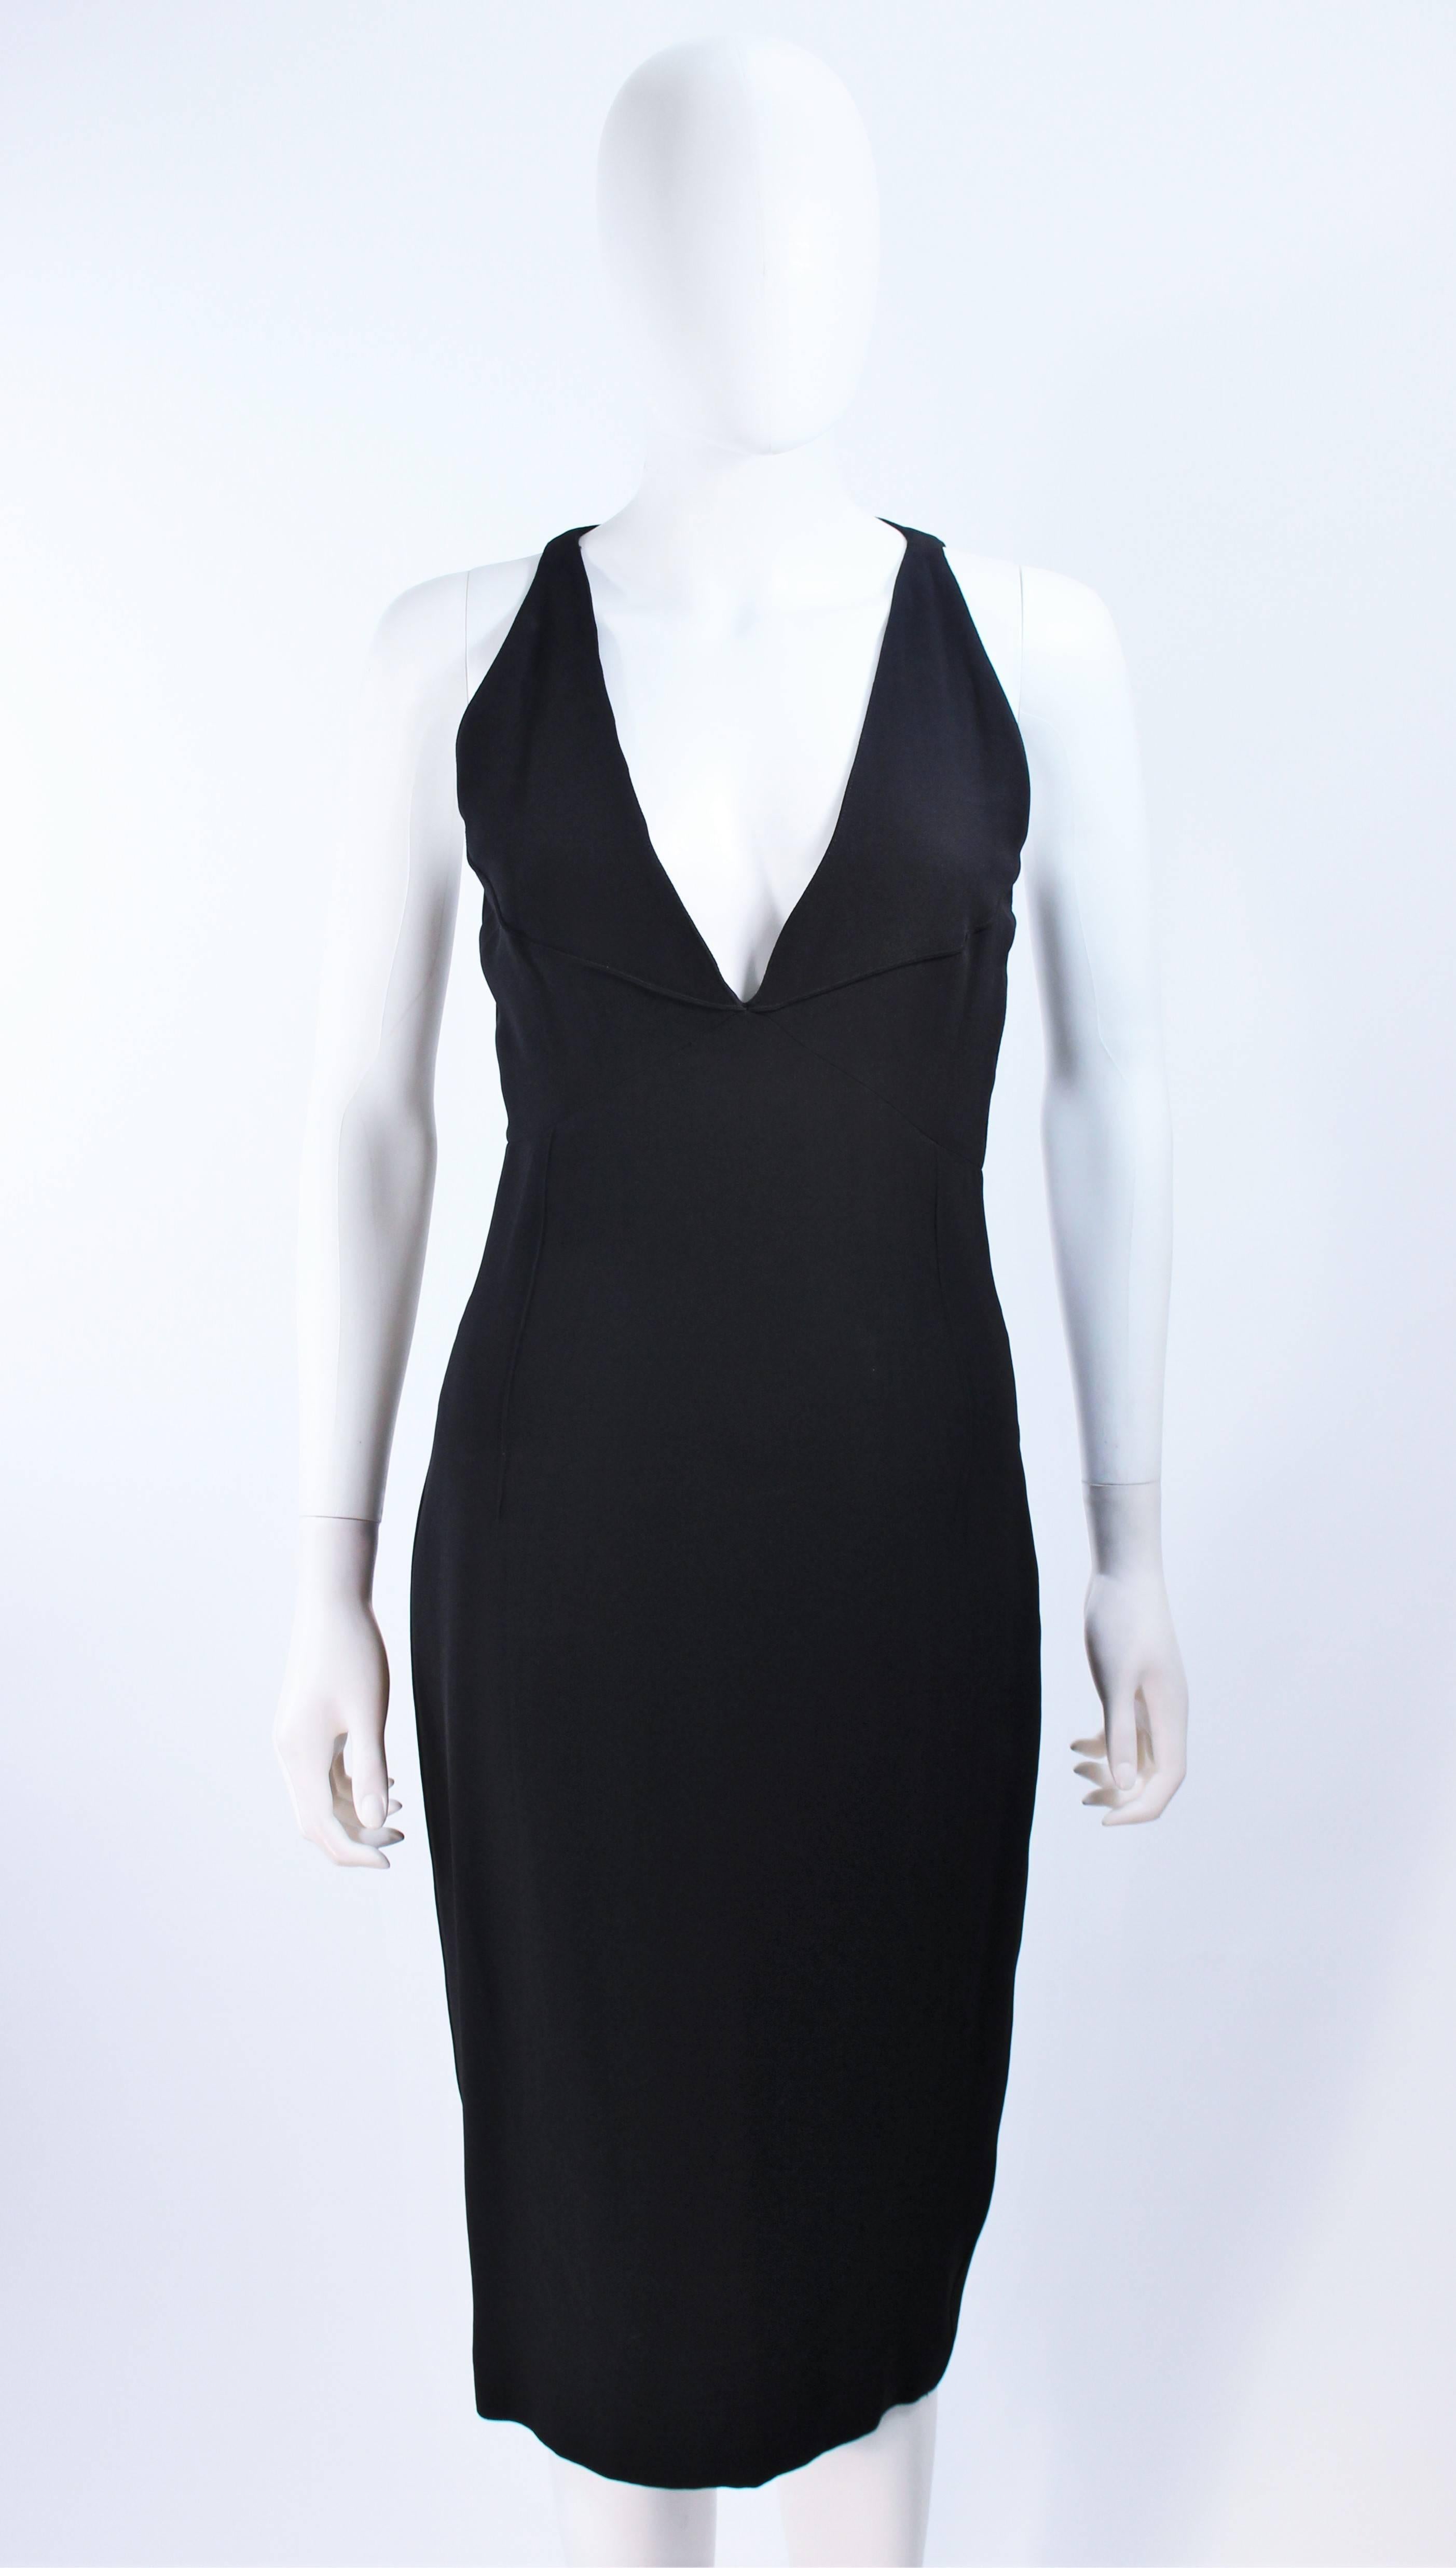 This Fendi cocktail dress is composed of a black viscose/rayon/acetate blend. Features external pipping details, a plunge neckline, and center back zipper closure. In excellent vintage condition.

**Please cross-reference measurements for personal